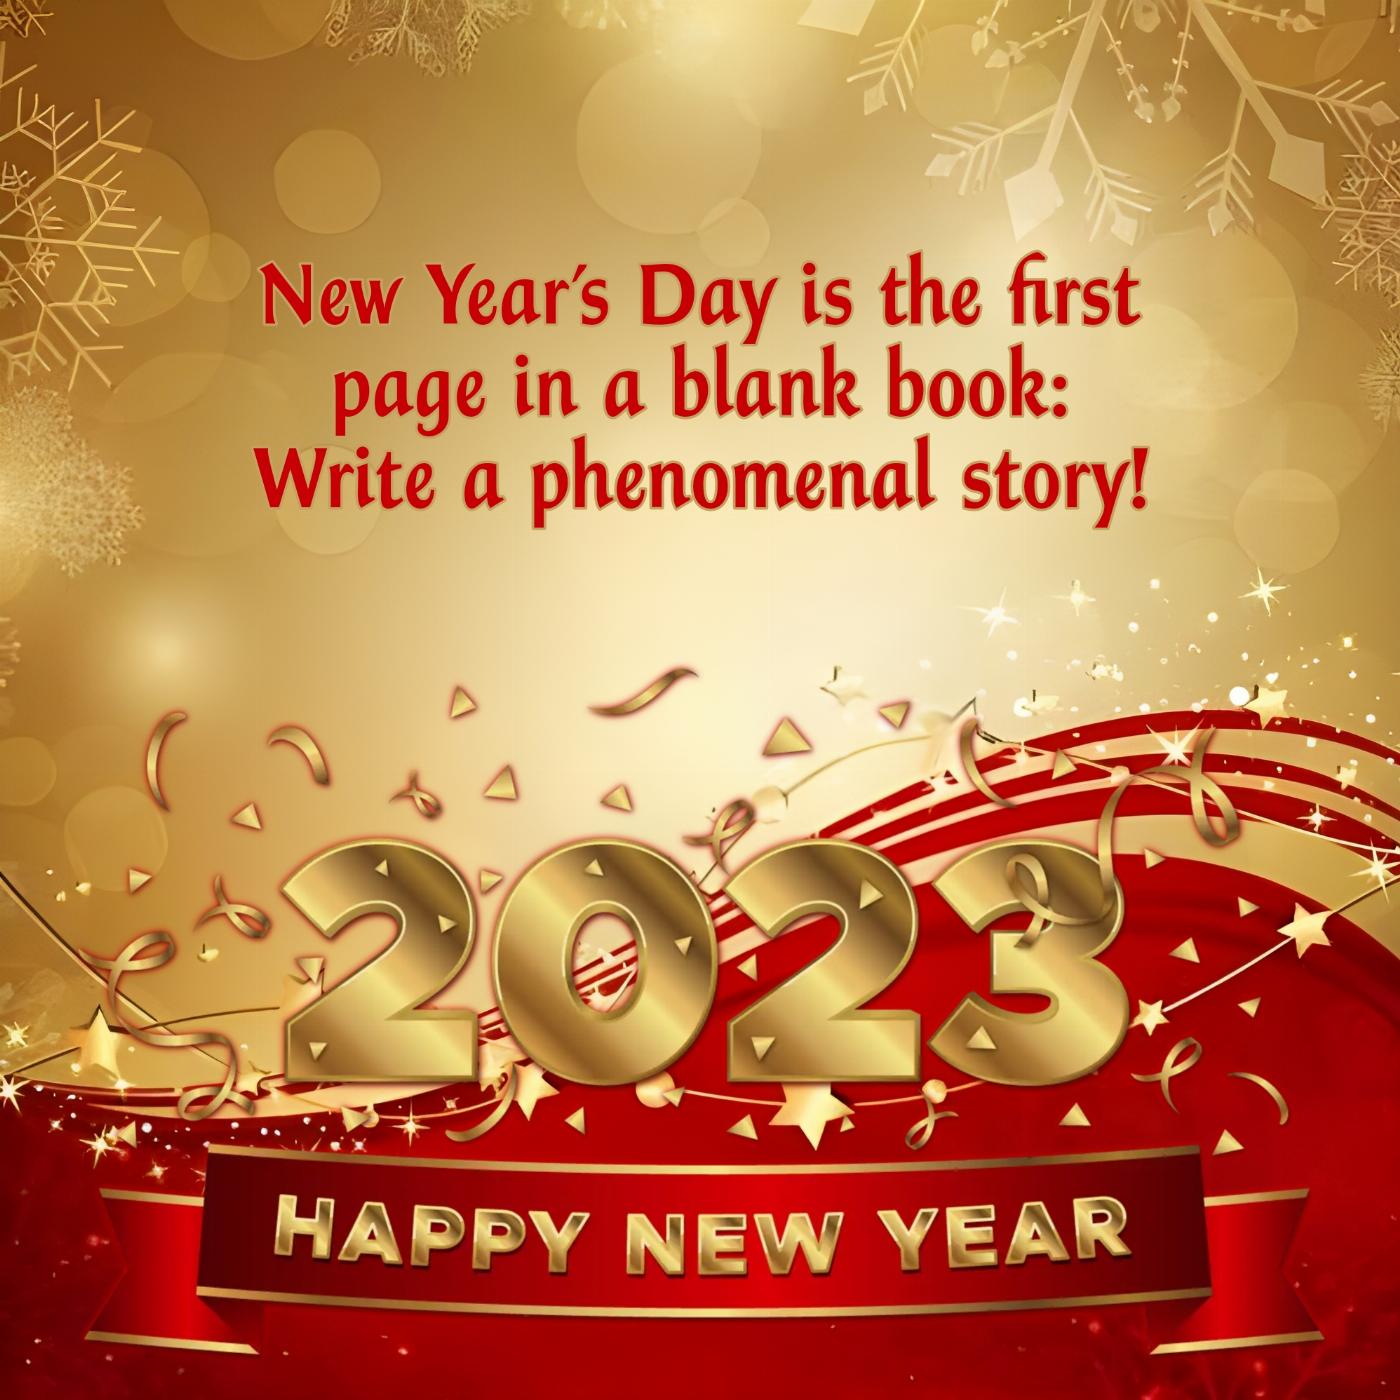 New Years Day is the first page in a blank book: